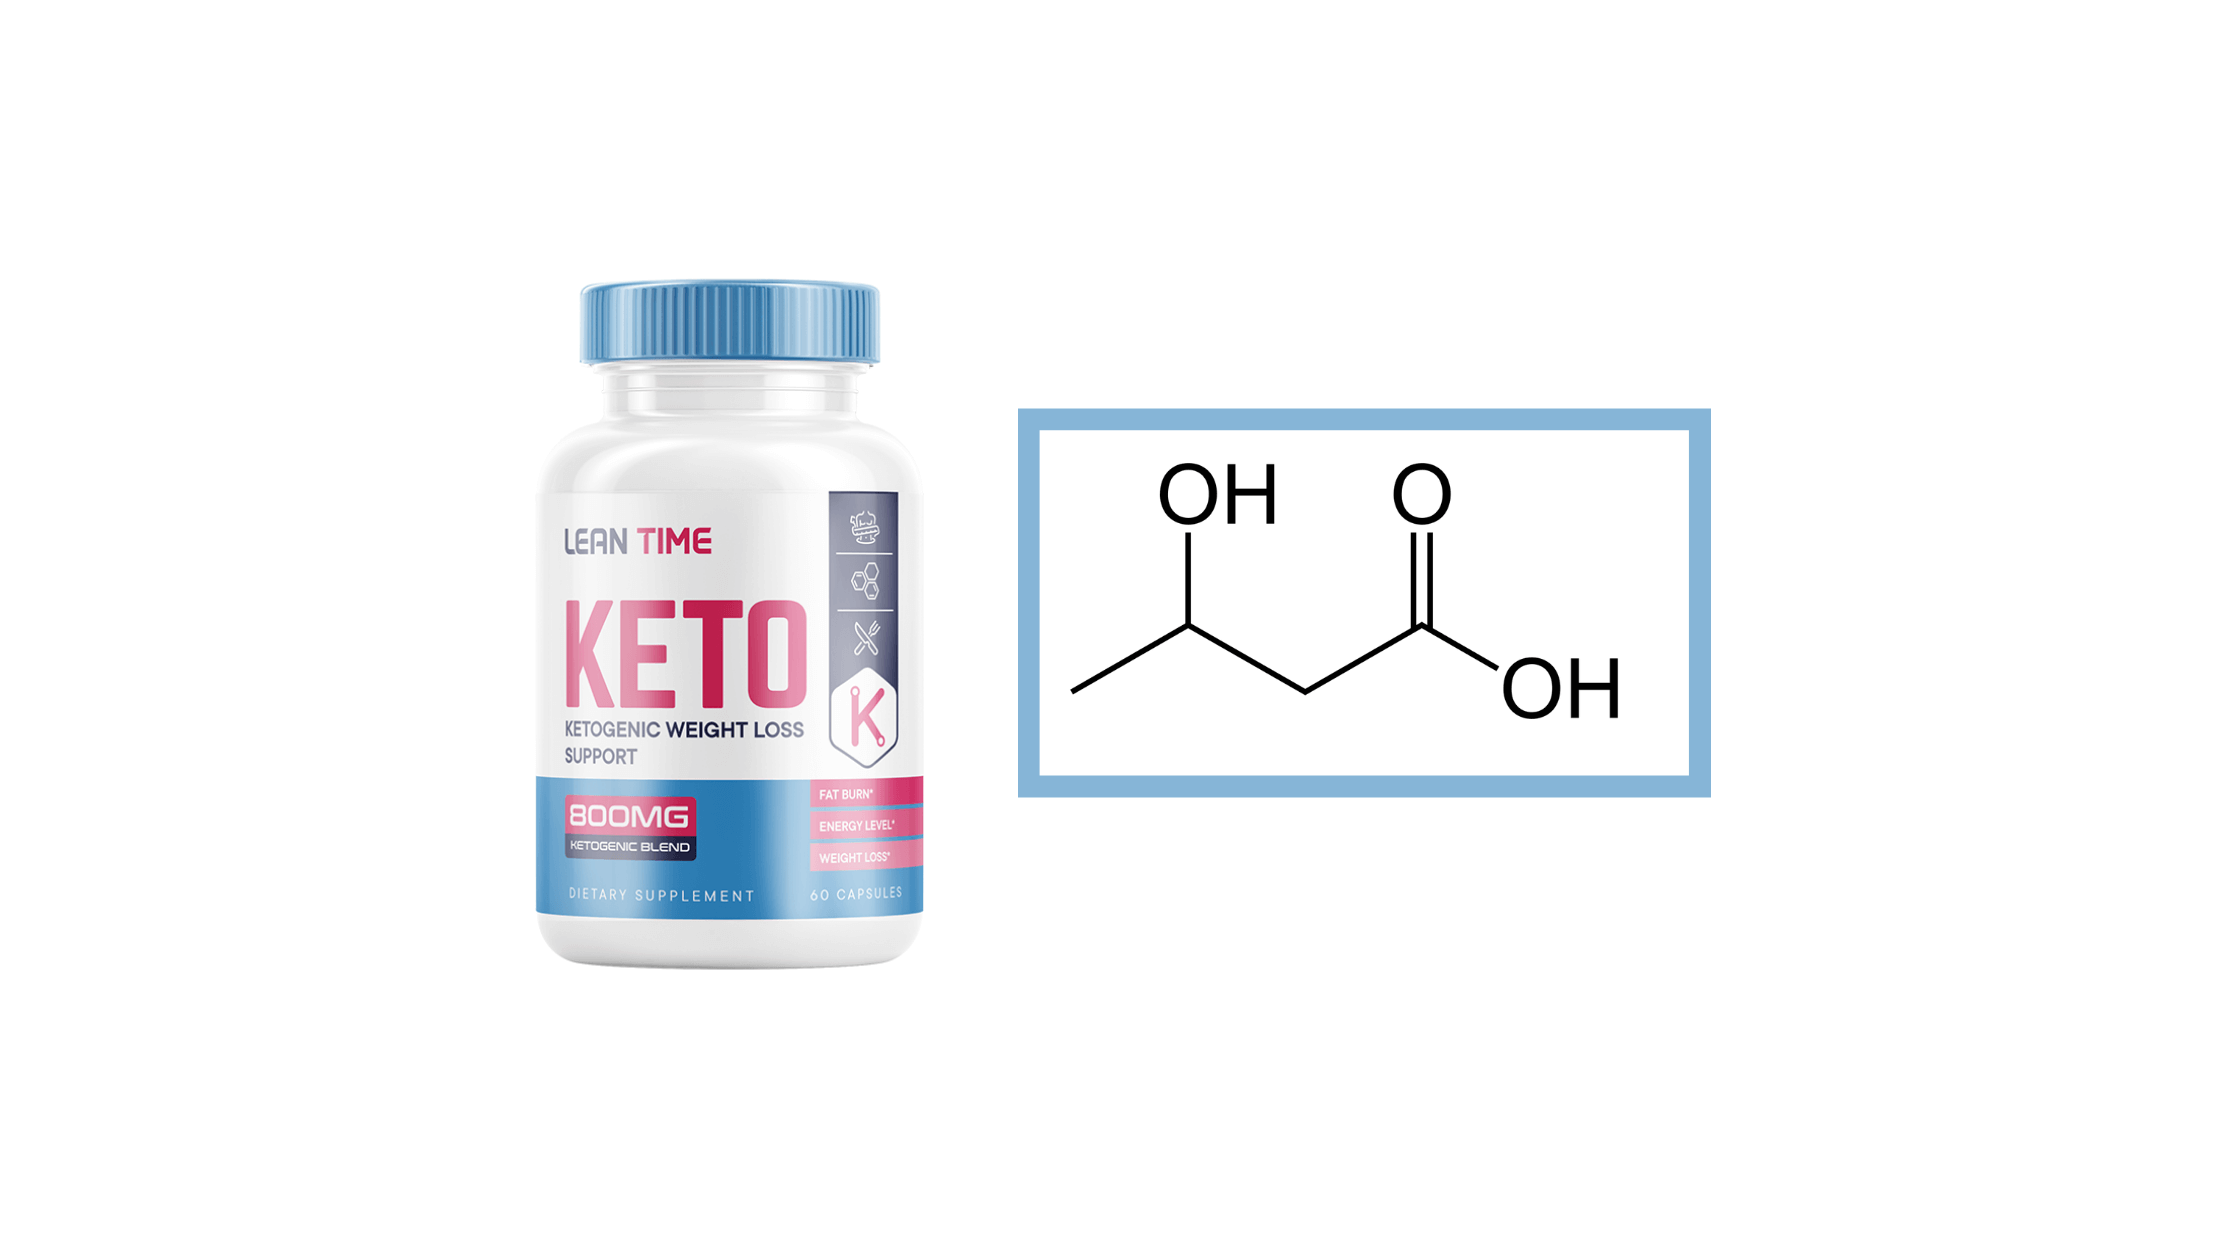 Ingredients of Lean Time Keto supplement